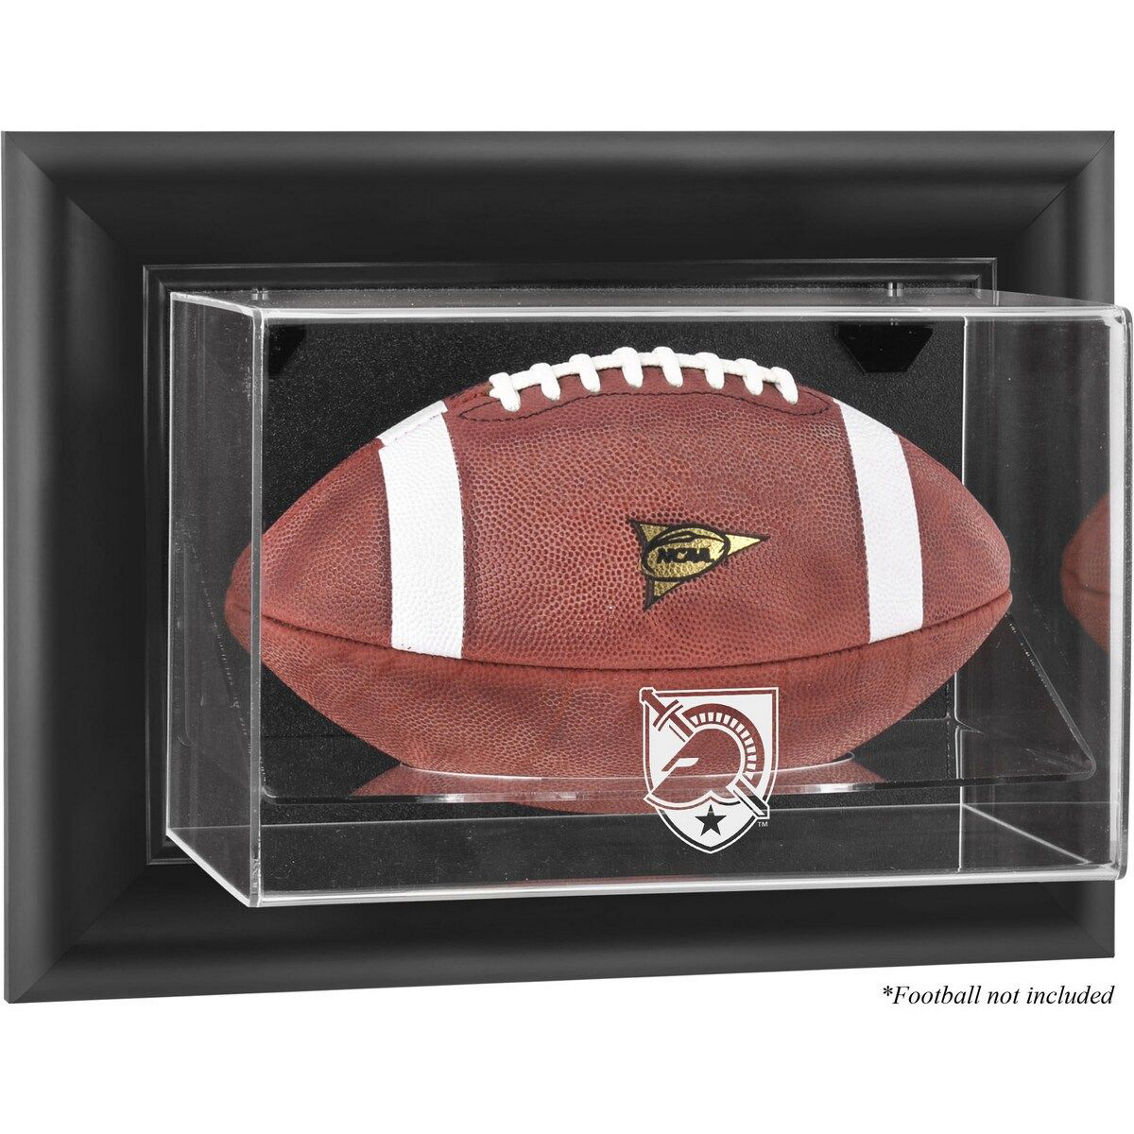 Fanatics Authentic Army Black Knights Black Framed (2015-Present Logo) Wall-Mountable Football Display Case - Image 2 of 2